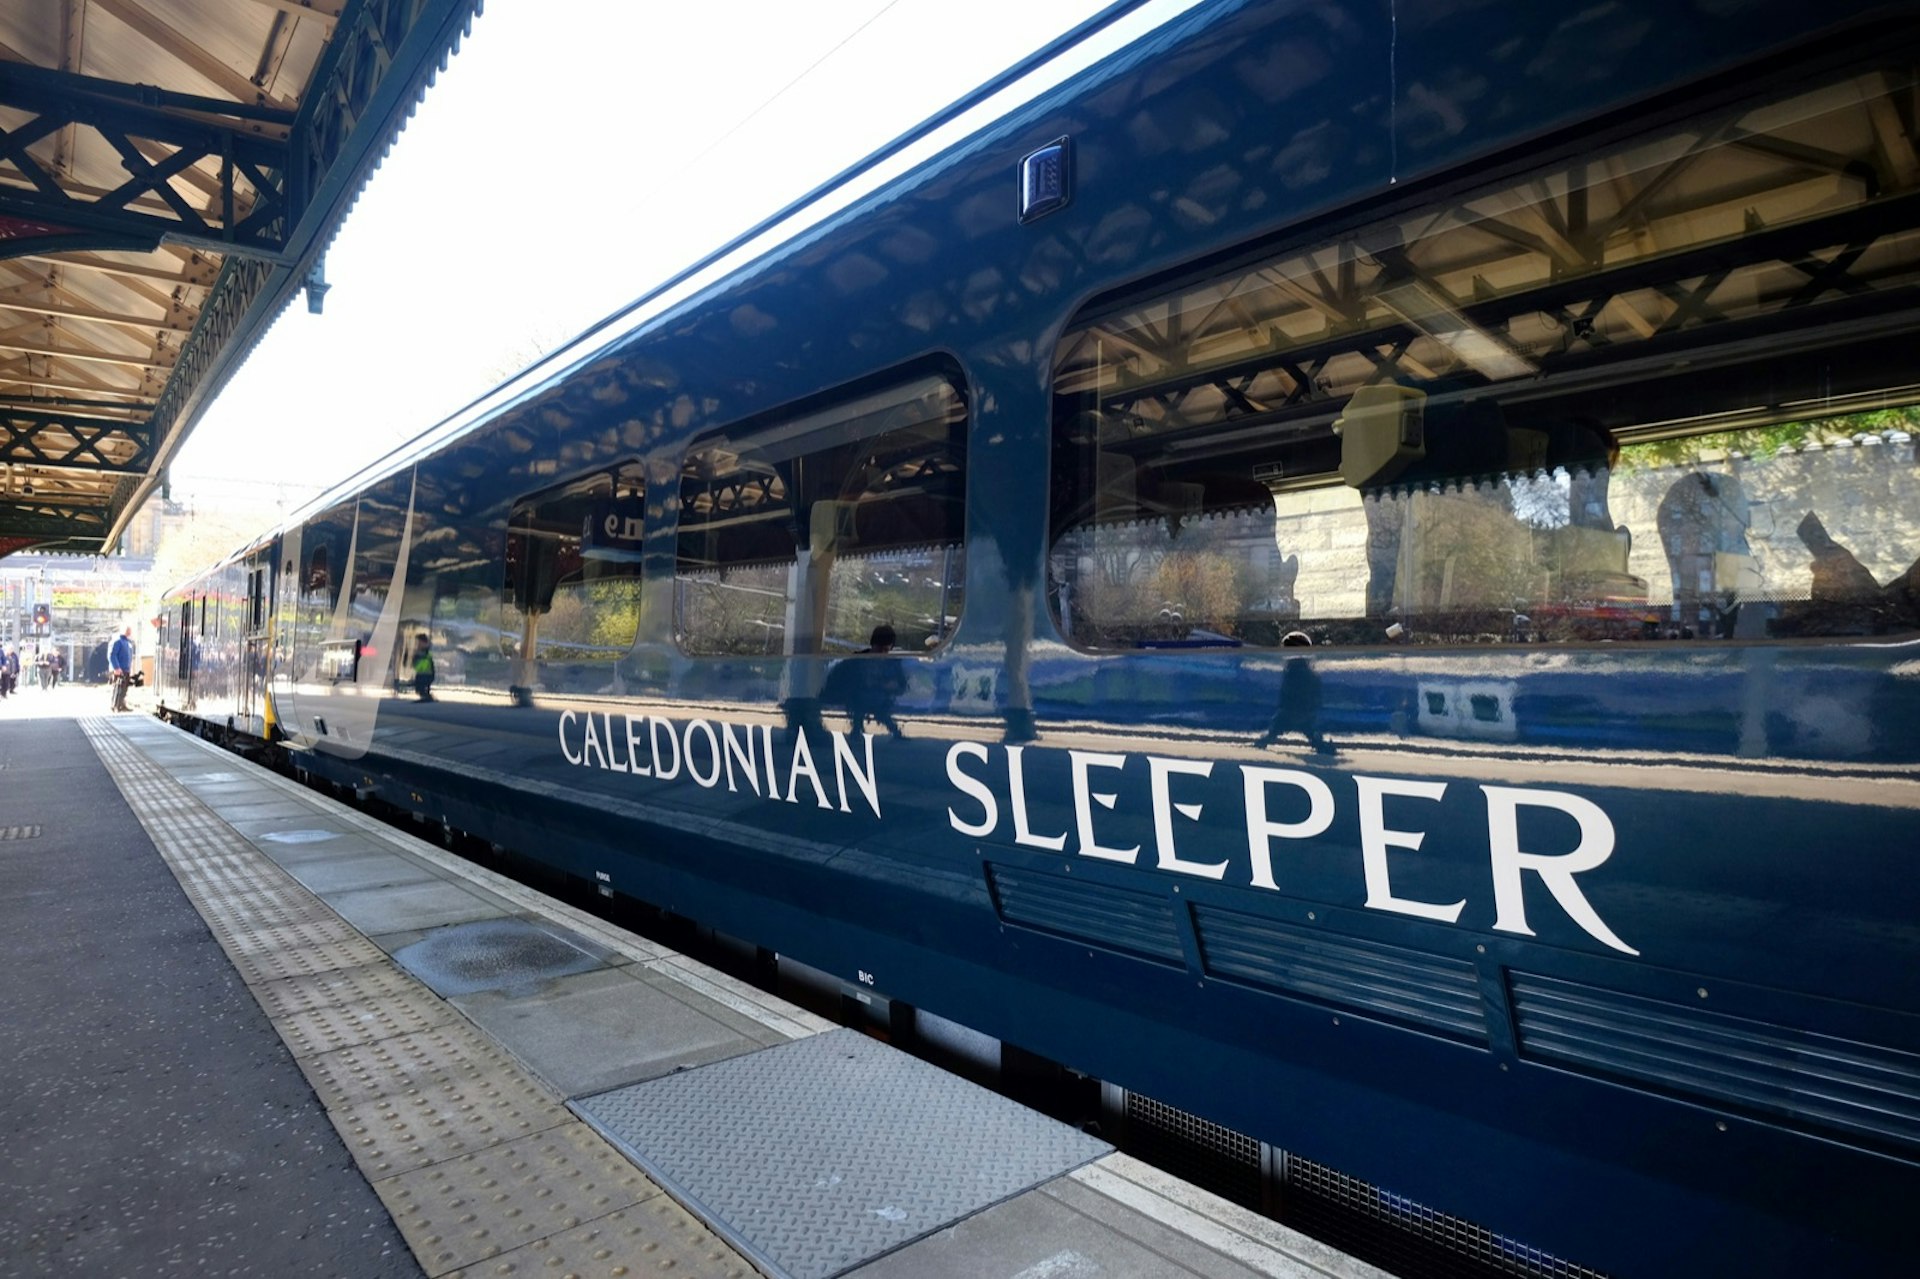 A royal blue train sits in a station with the white logo of Caledonian Sleeper on the side; Amazing train journeys